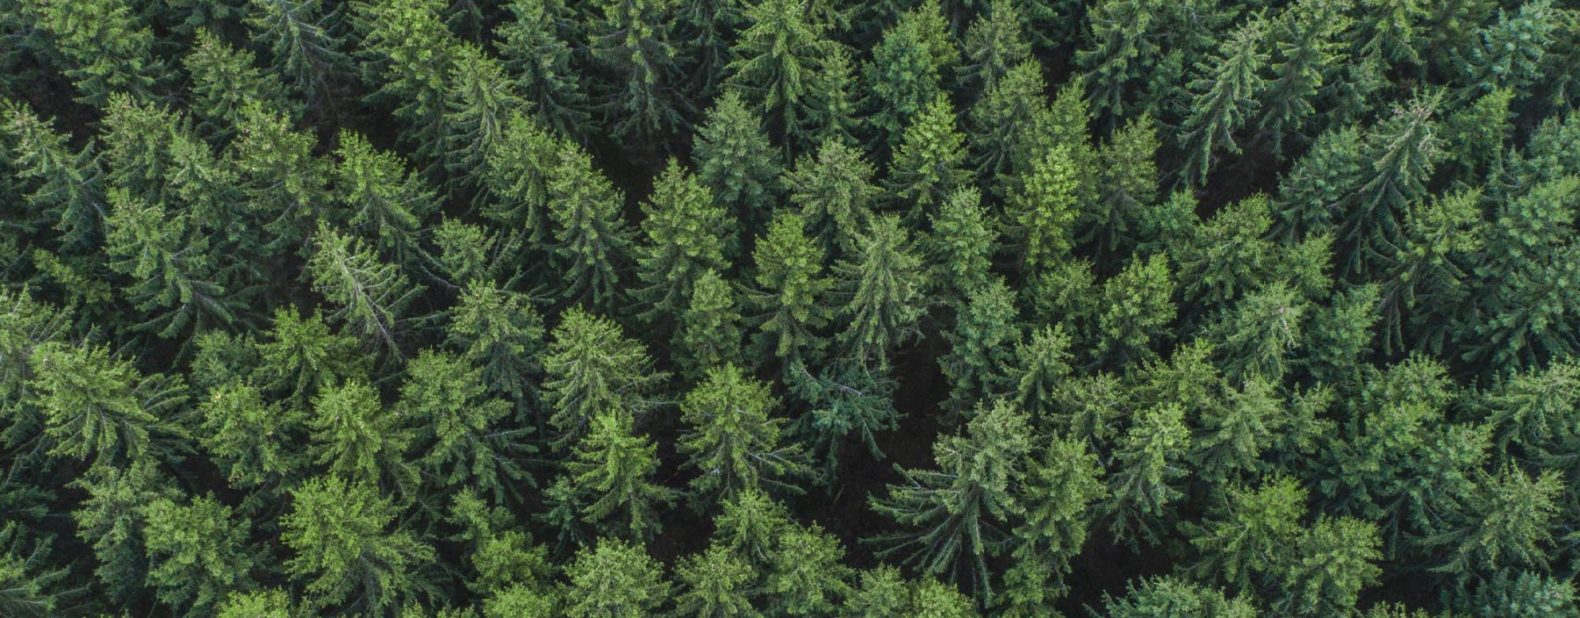 Top of Trees - How Your Brand Can Become Eco-Friendly